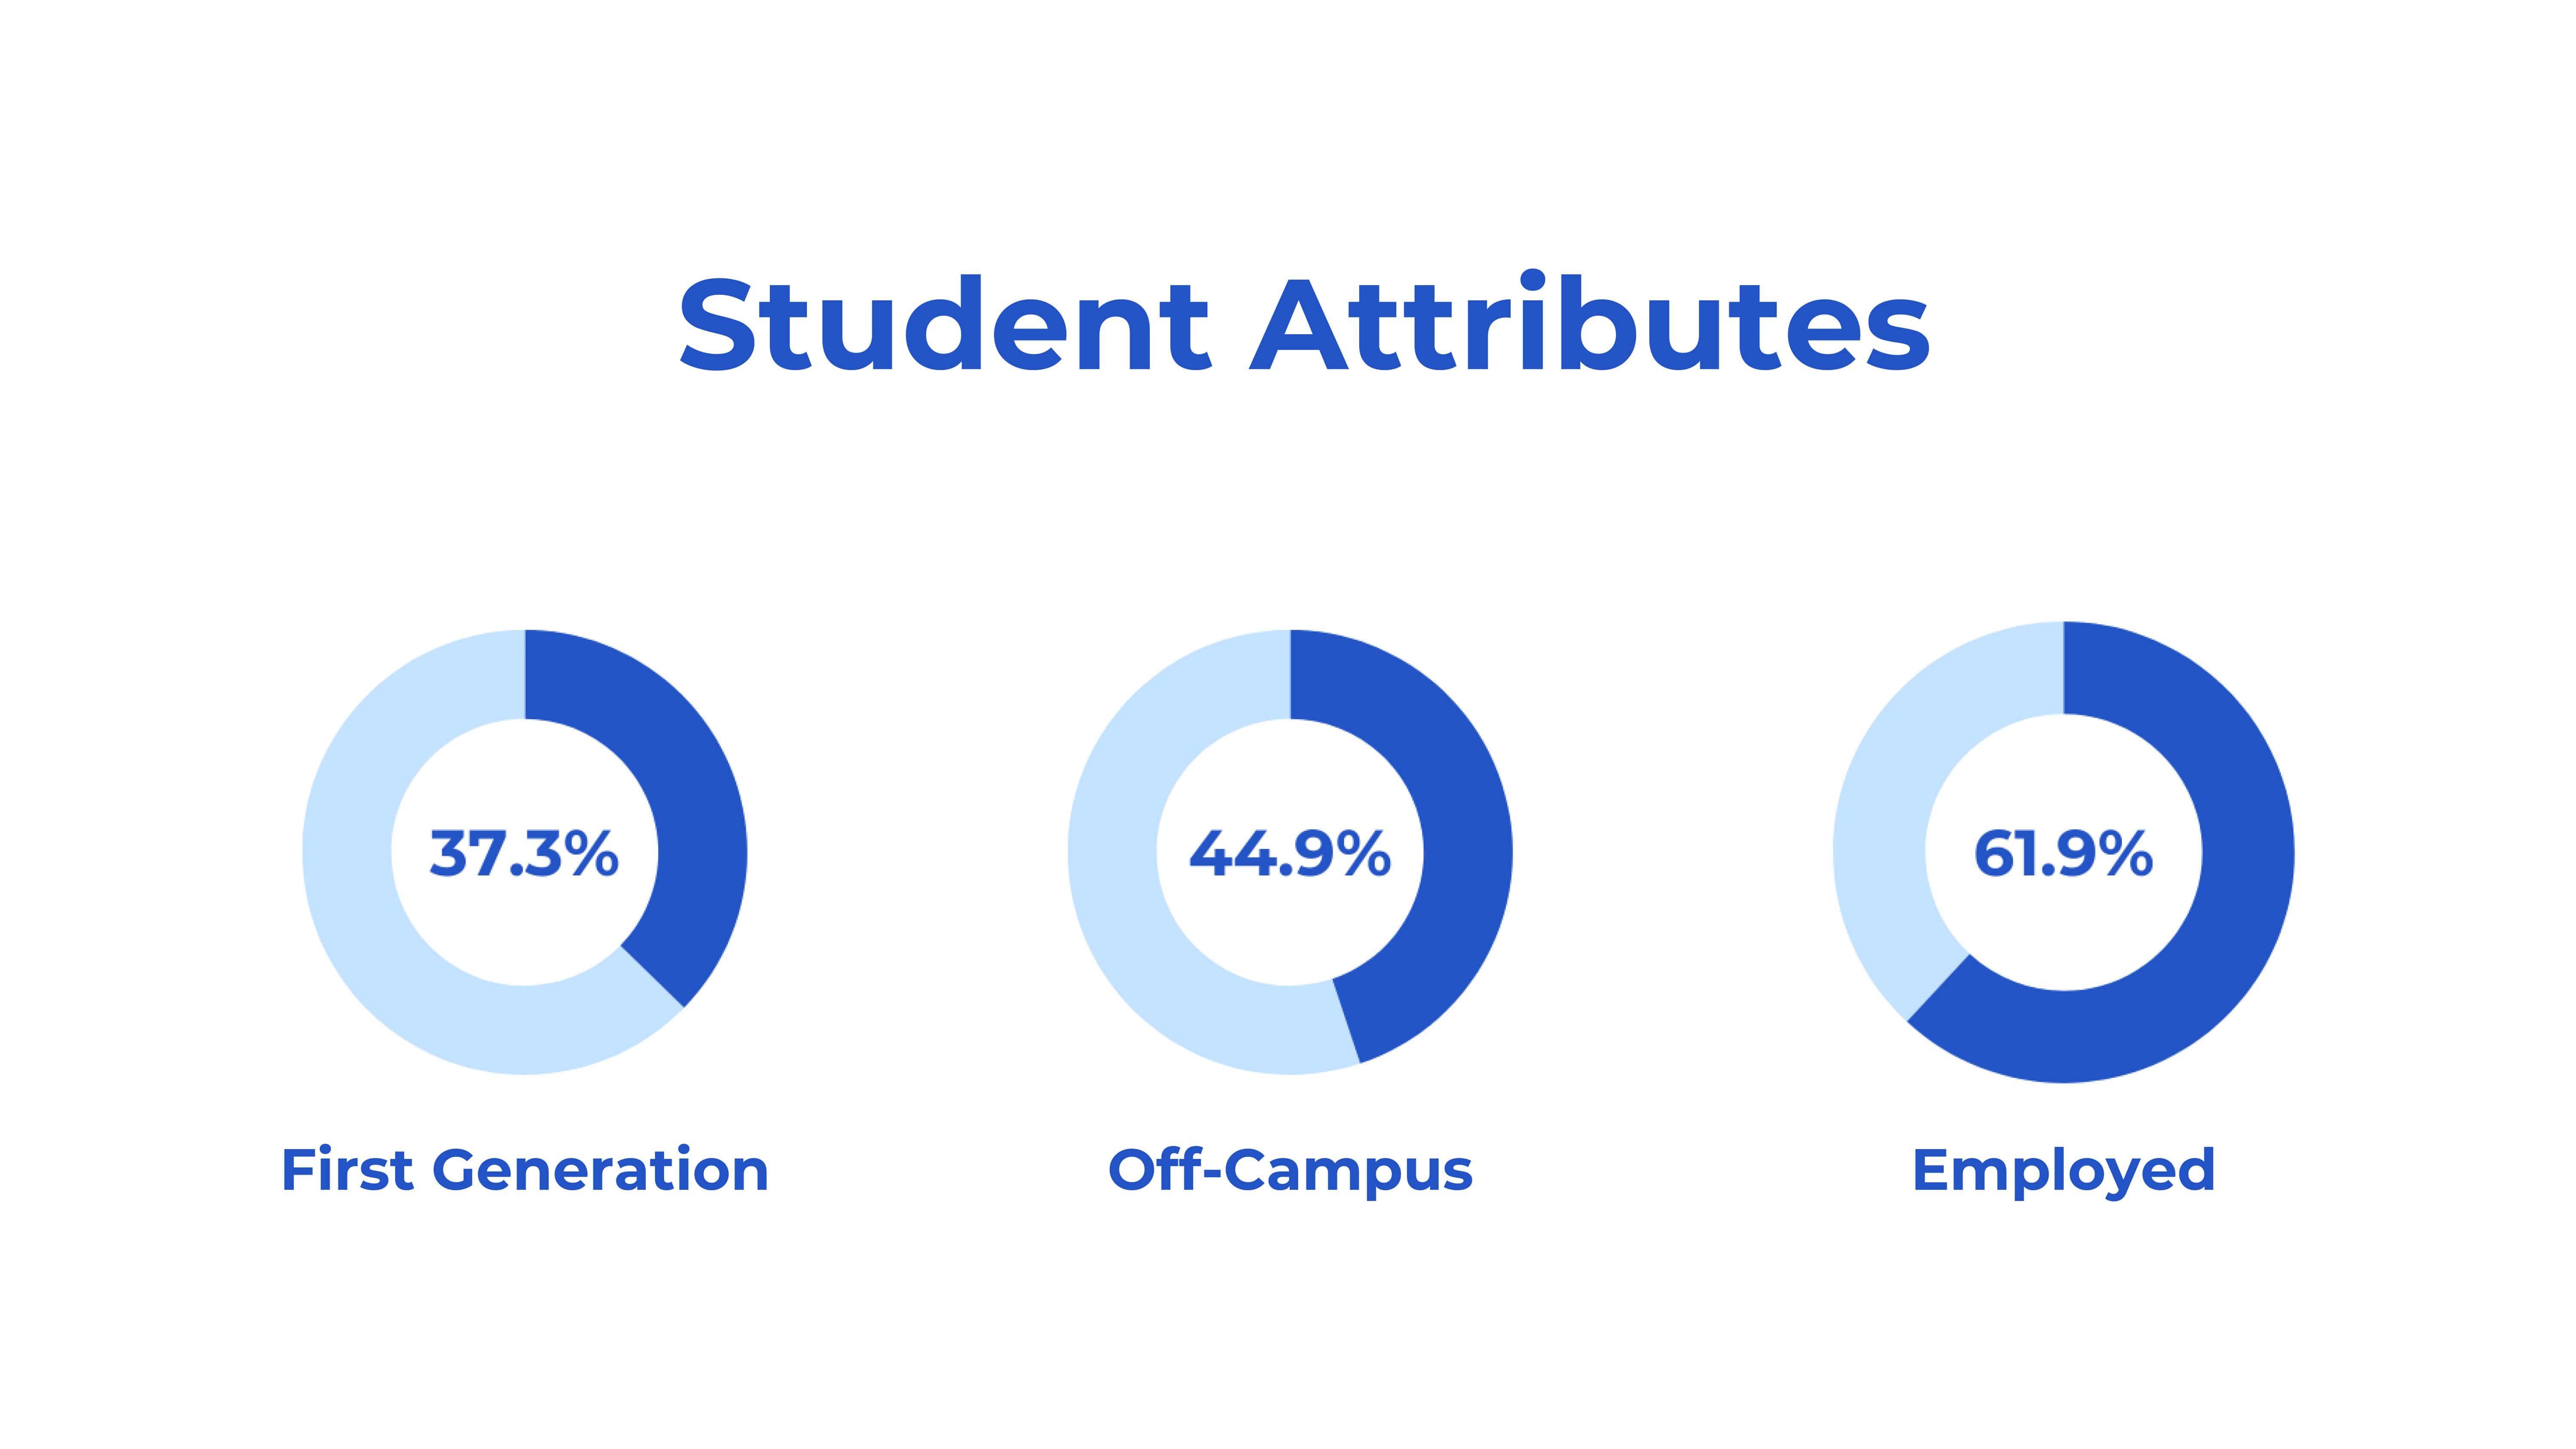 Case Study Attributes: Student Attributes:  37.3%: First Generation 44.9%: Living off campus 61.9%: Employed